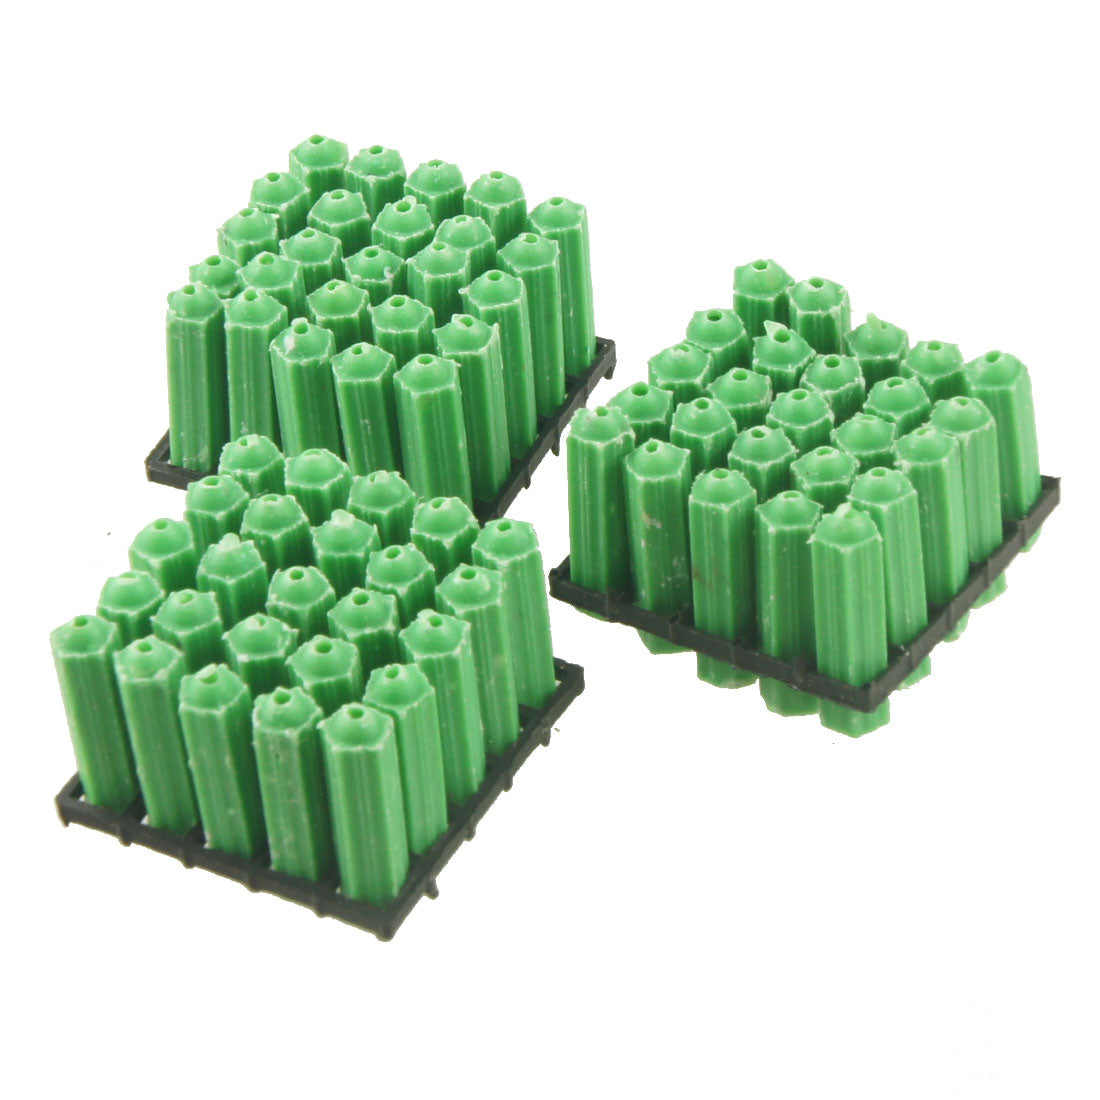 uxcell Uxcell 75 Pcs 8mm x 25mm Green Plastic Fixing Wall Plugs for 2-5mm Screws